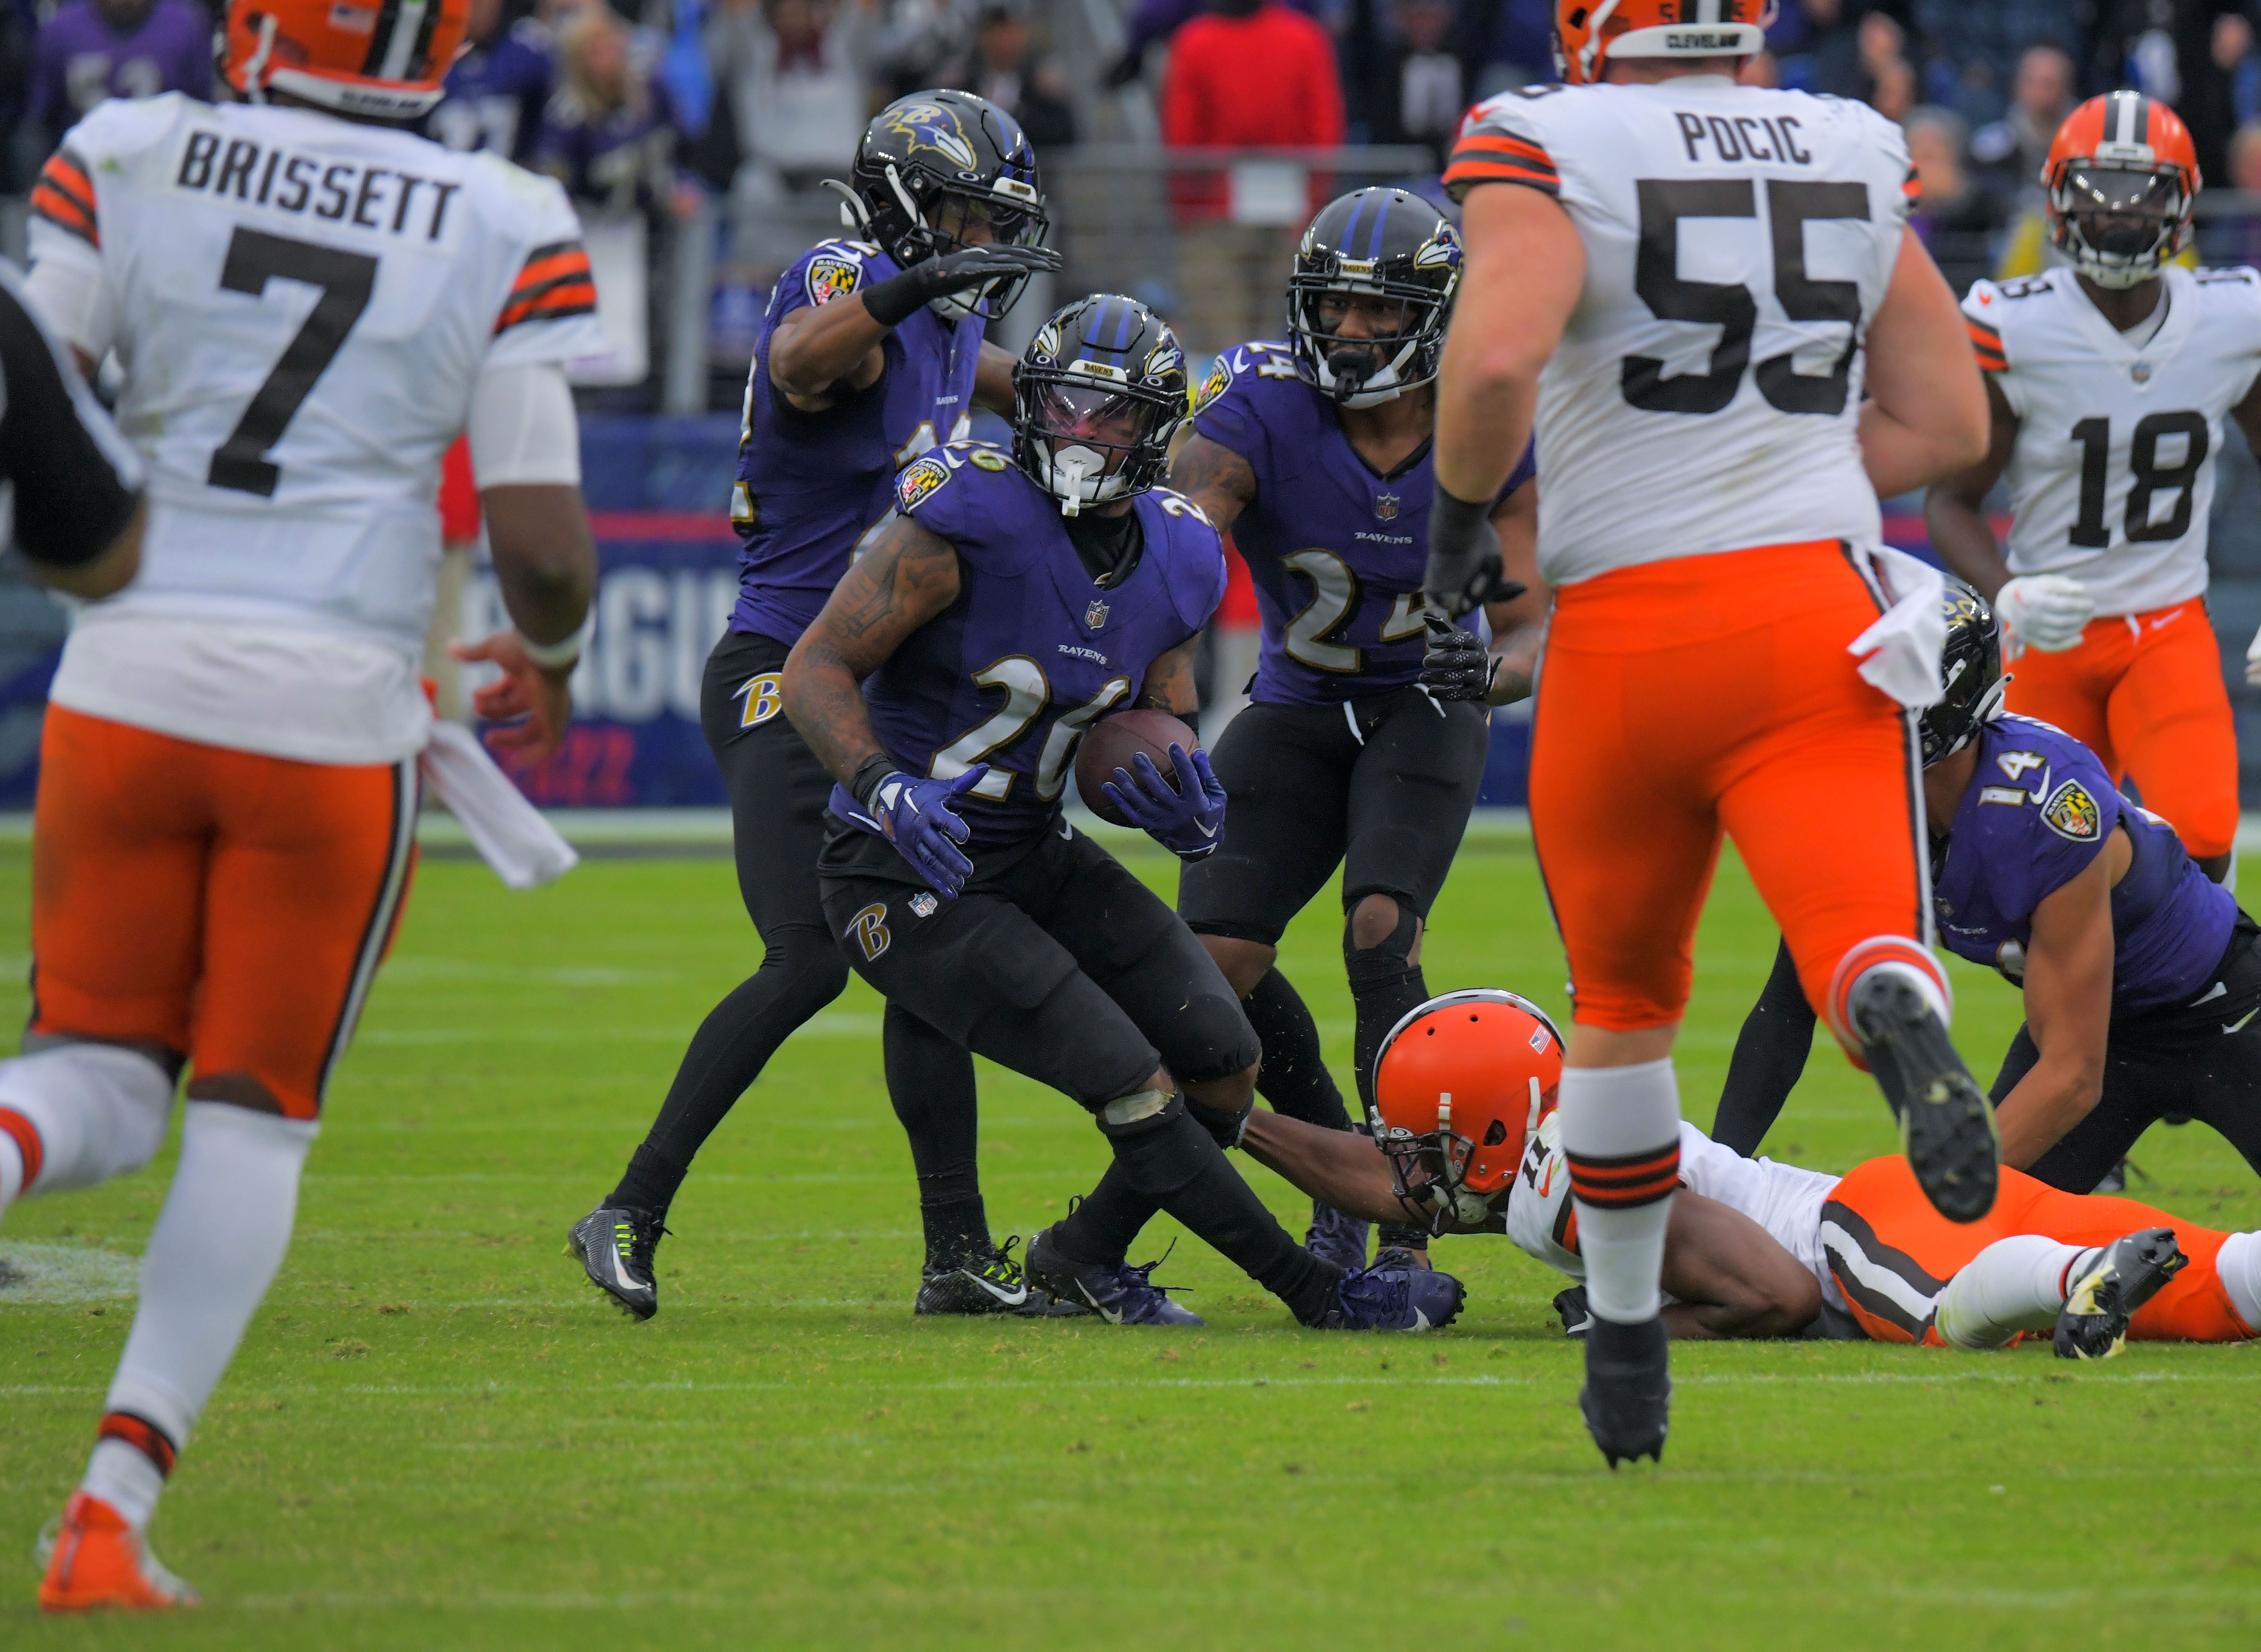 Five things we learned from the Ravens' 23-20 win over the Cleveland Browns